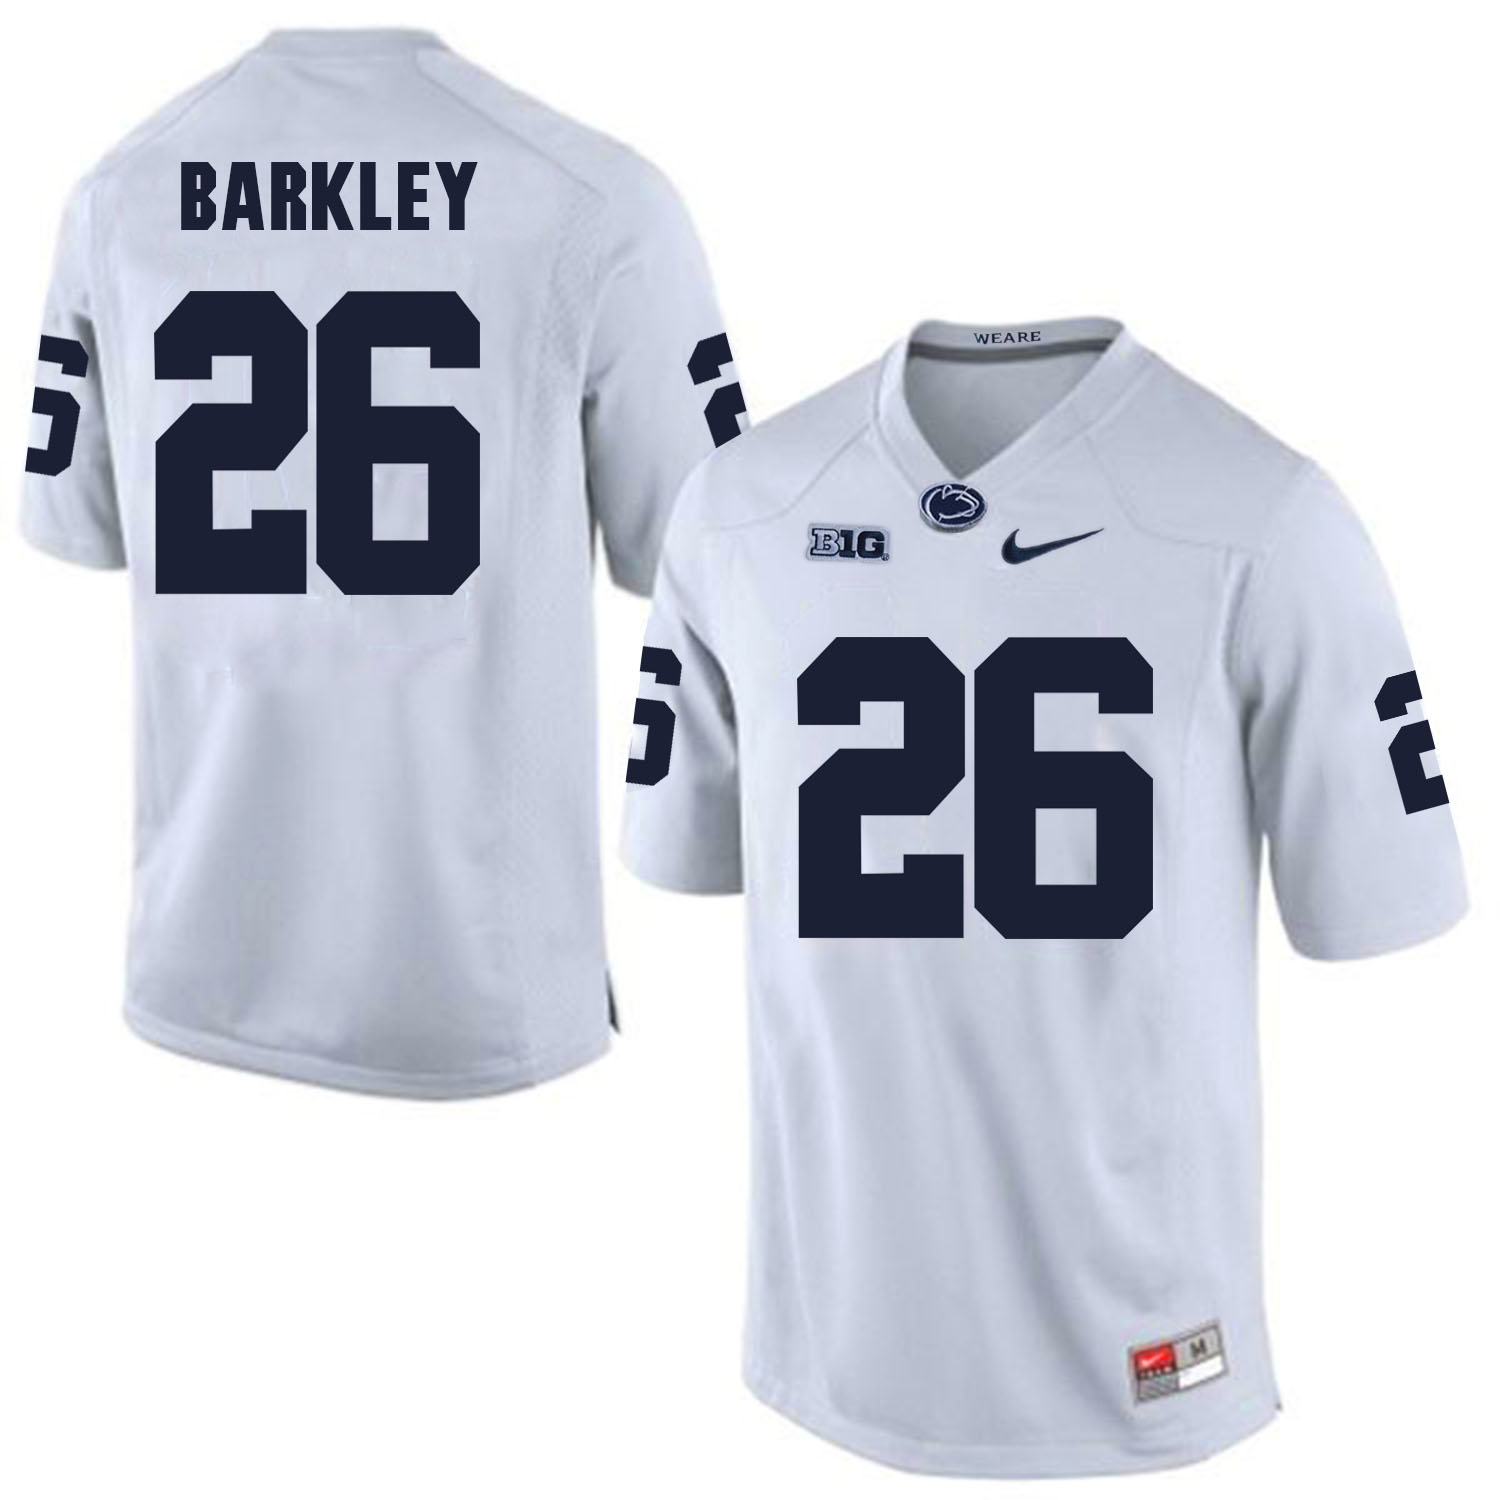 Penn State Nittany Lions 26 Saquon Barkley White College Football Jersey